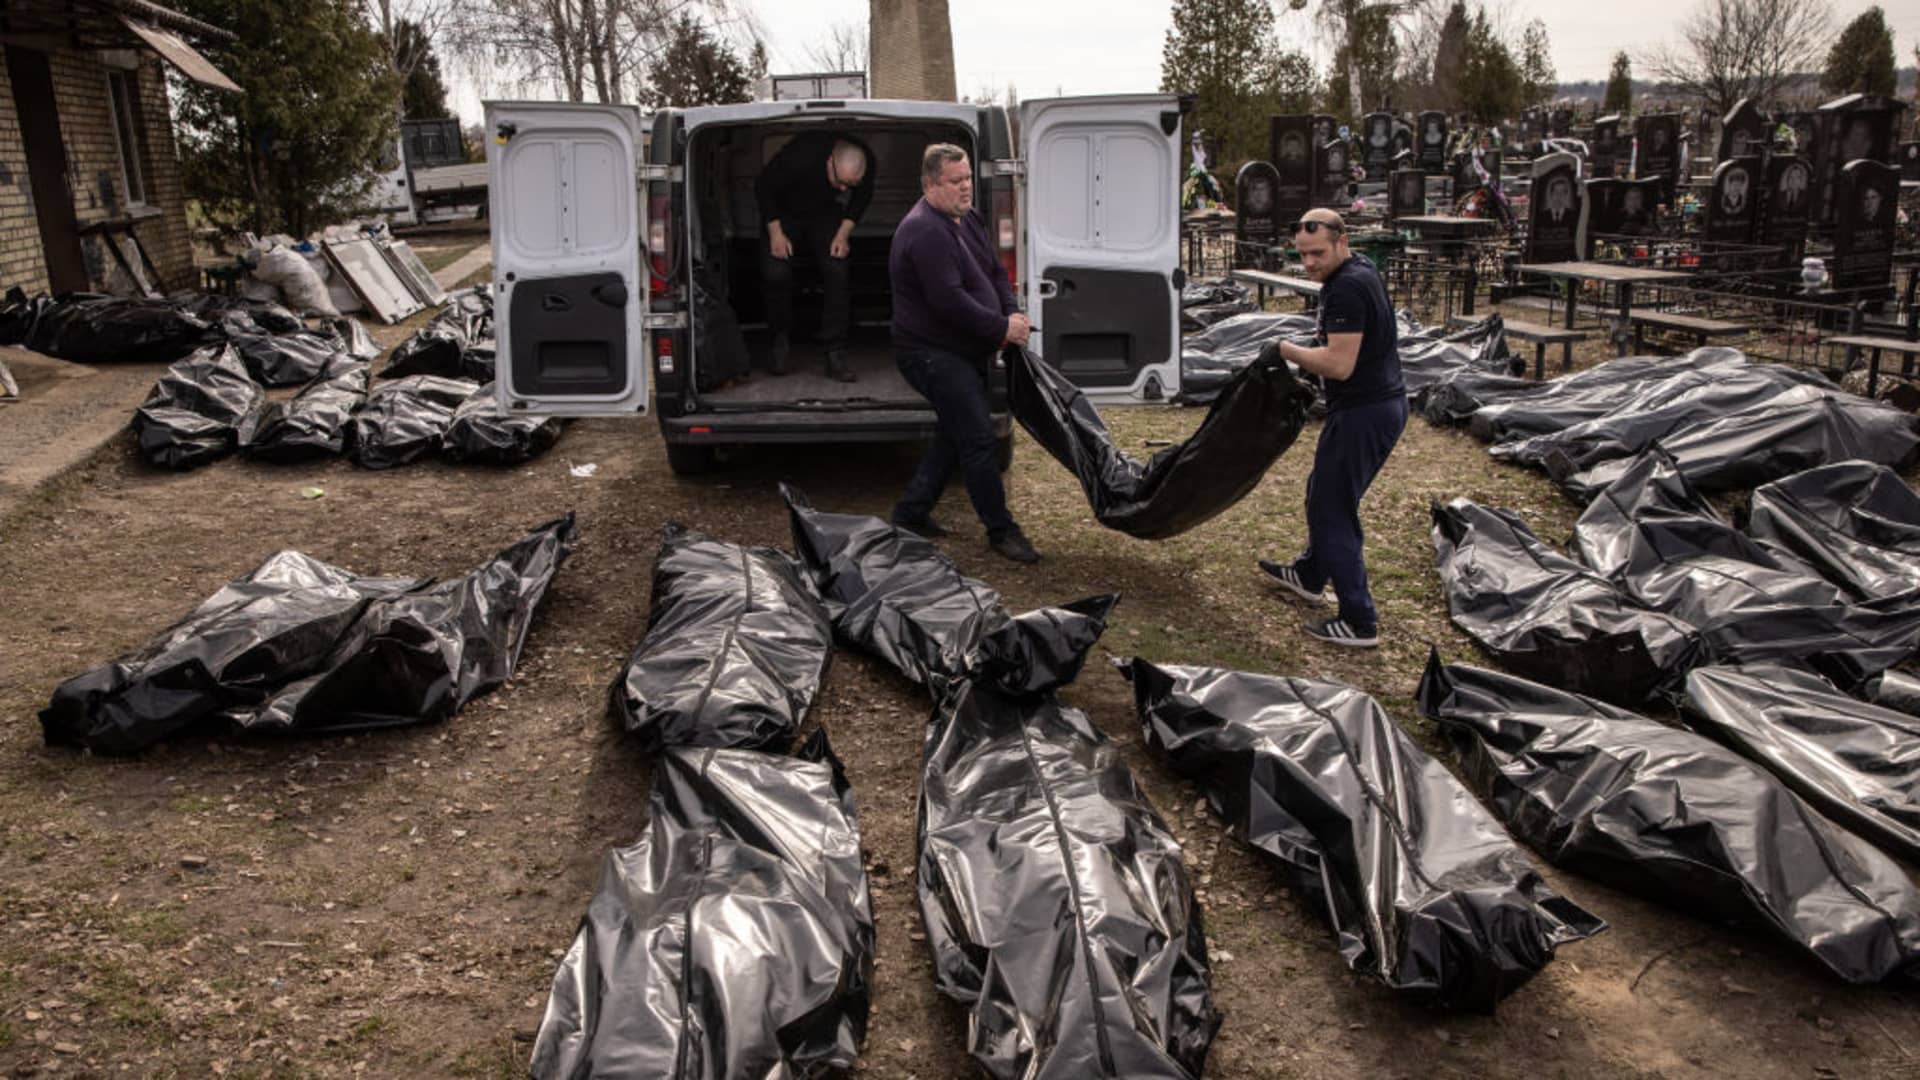 (EDITORS NOTE: Image contains graphic content) Cemetery workers unload bodies of civilians killed in and around Bucha before they are transported to the morgue at a cemetery on April 07, 2022 in Bucha, Ukraine